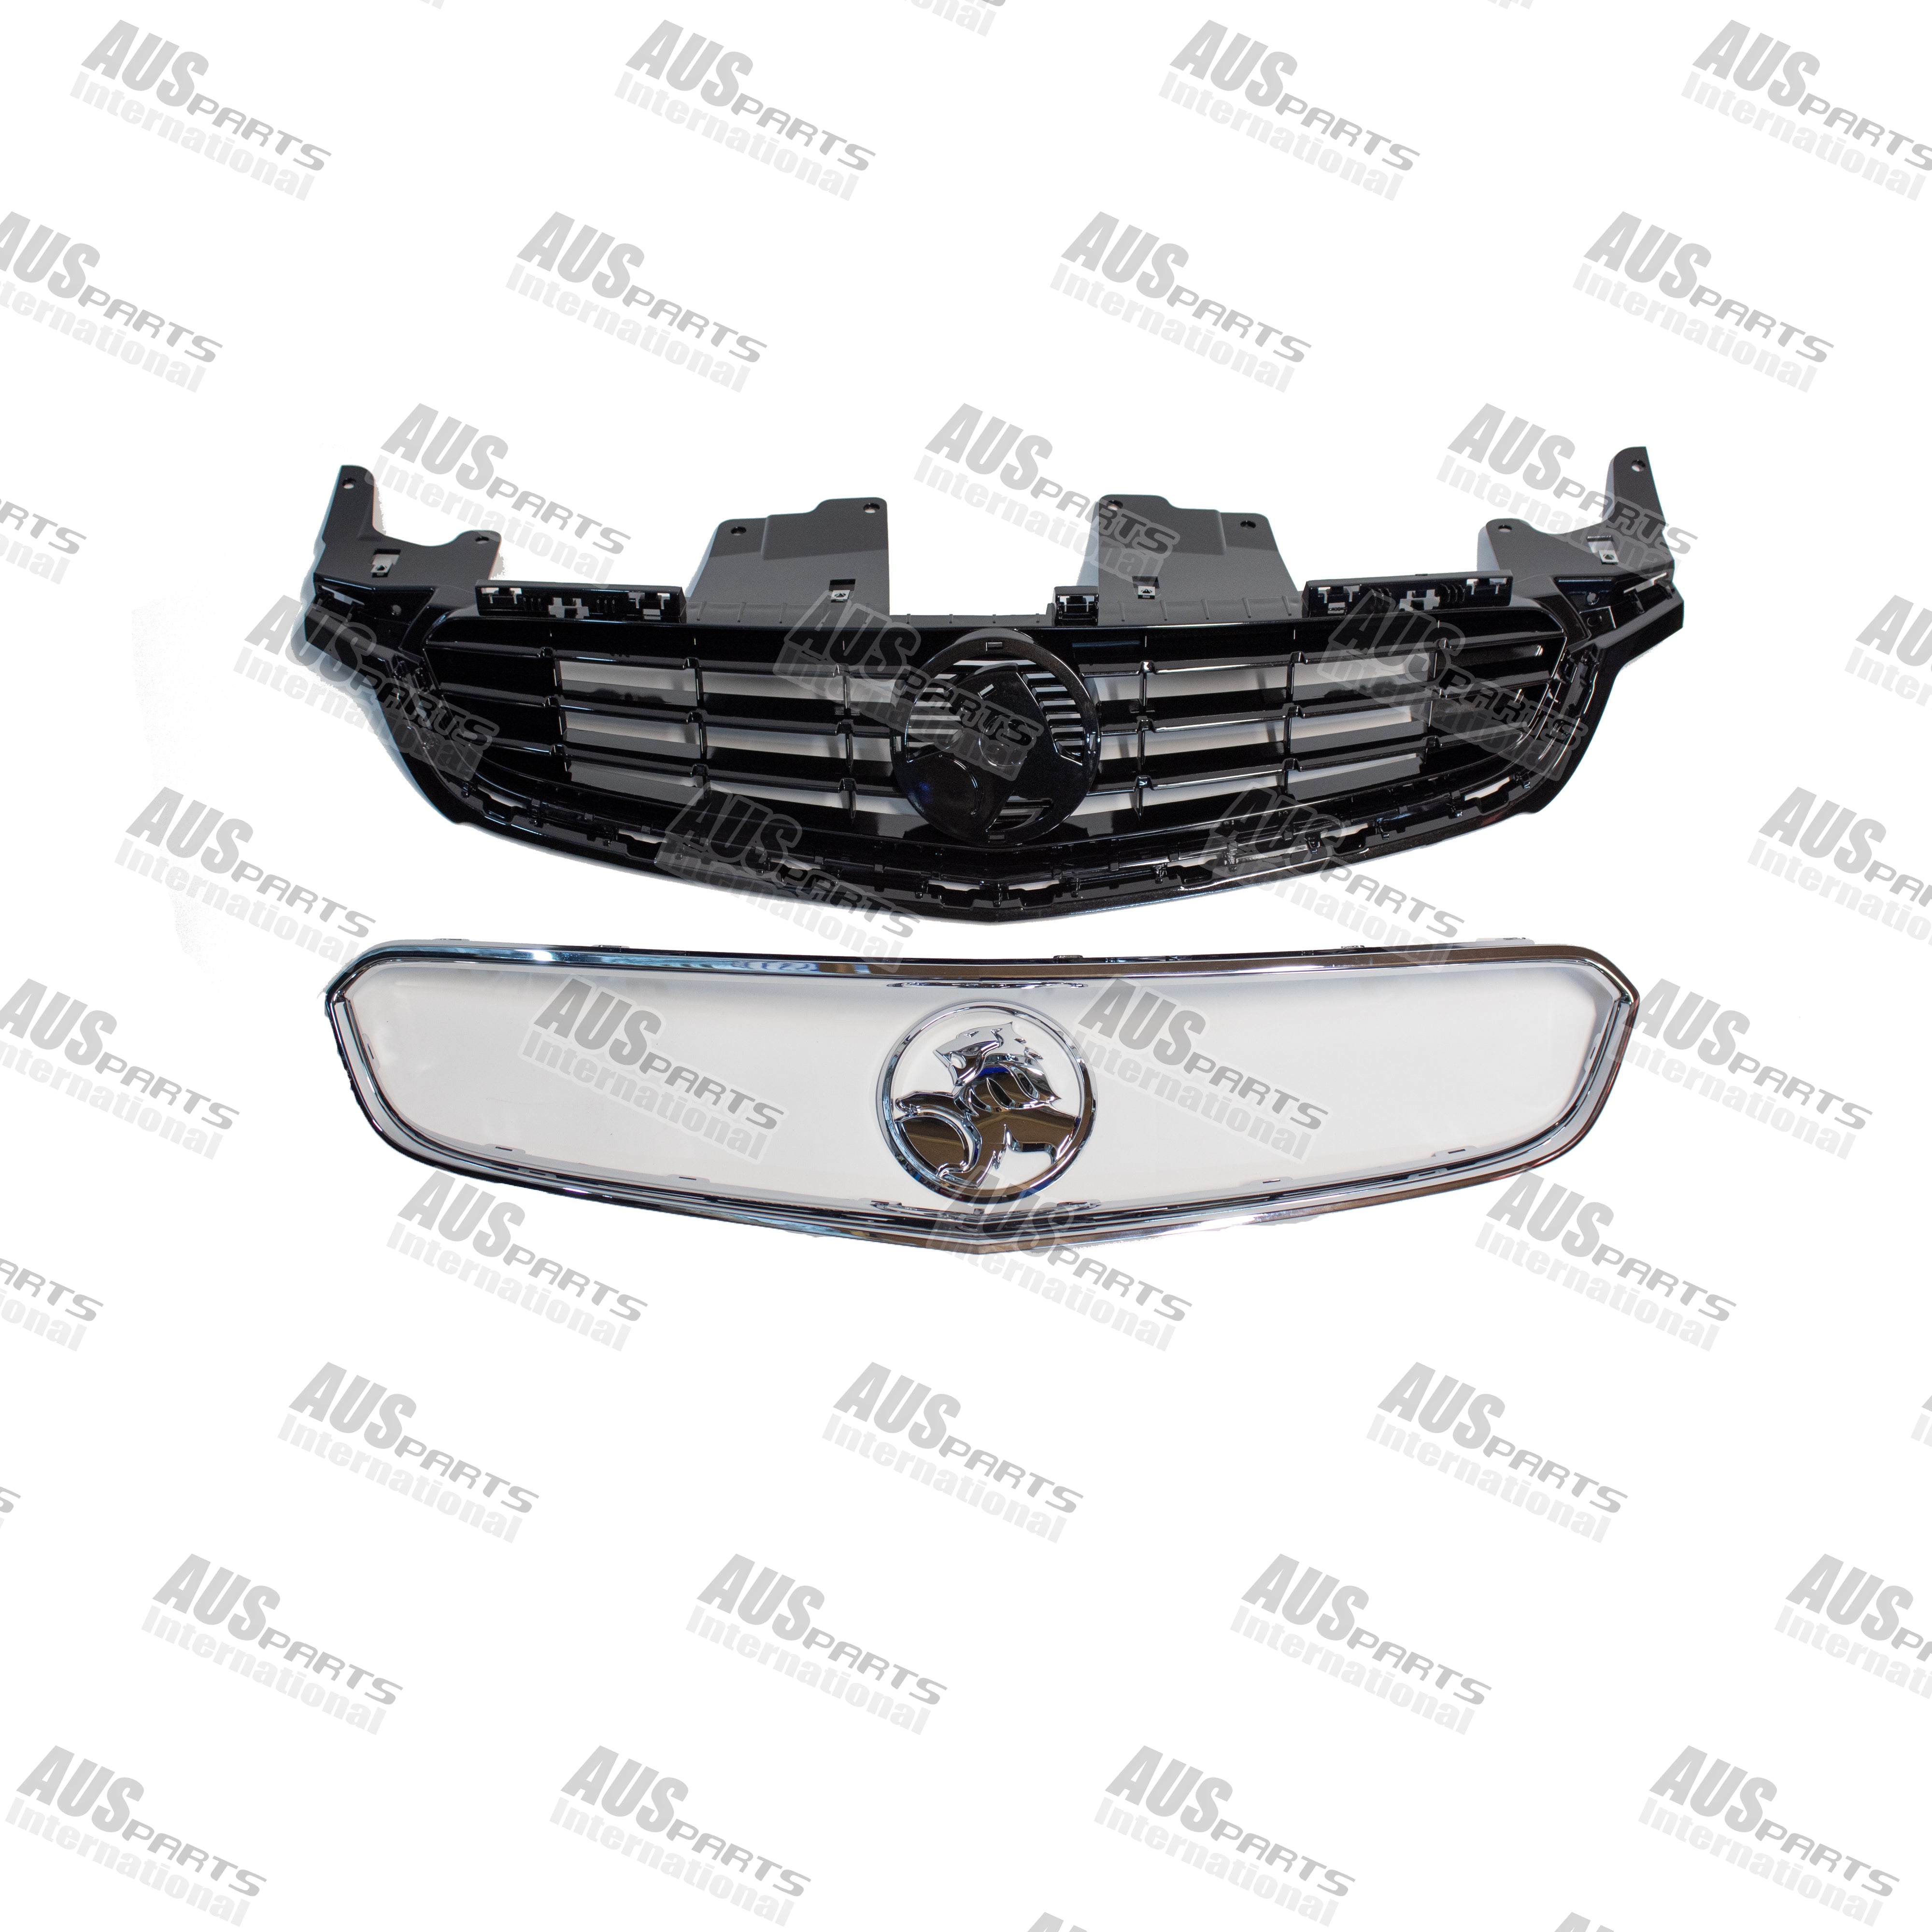 Holden grill conversion set kit for Series Chevy SS VF Commodore N